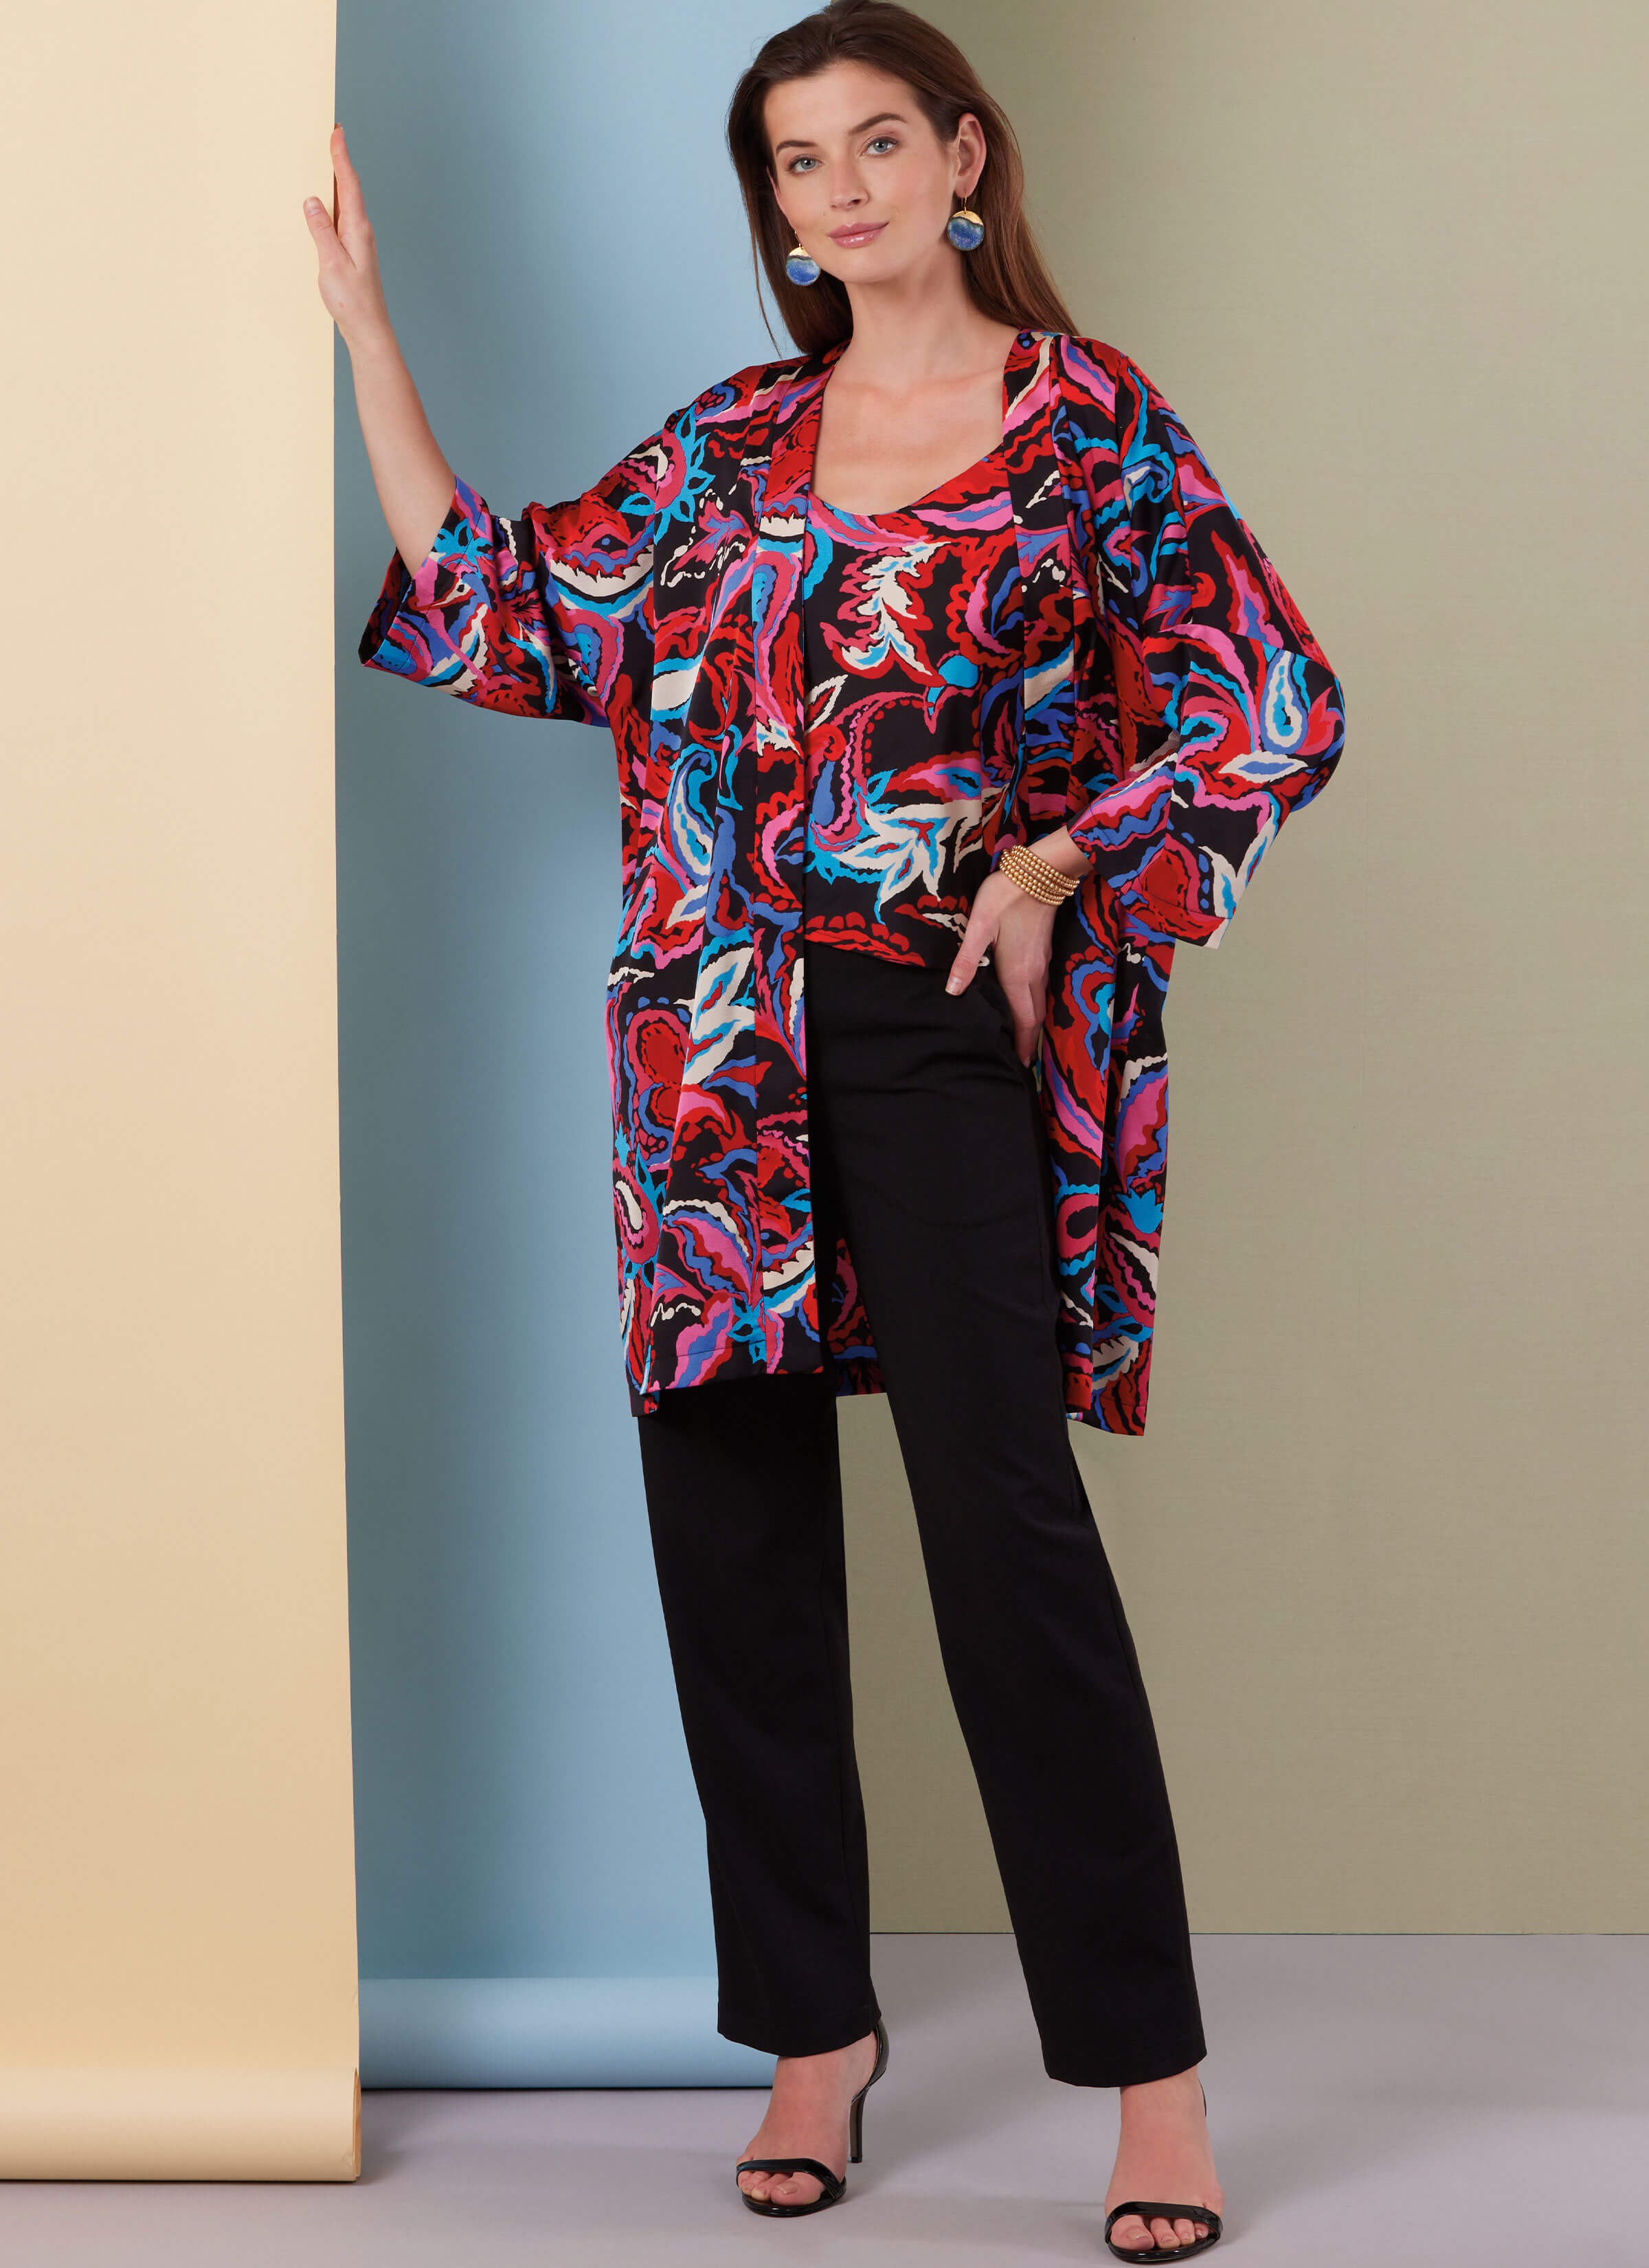 Butterick Sewing Pattern B7001 Misses' Jacket, Camisole and Trousers